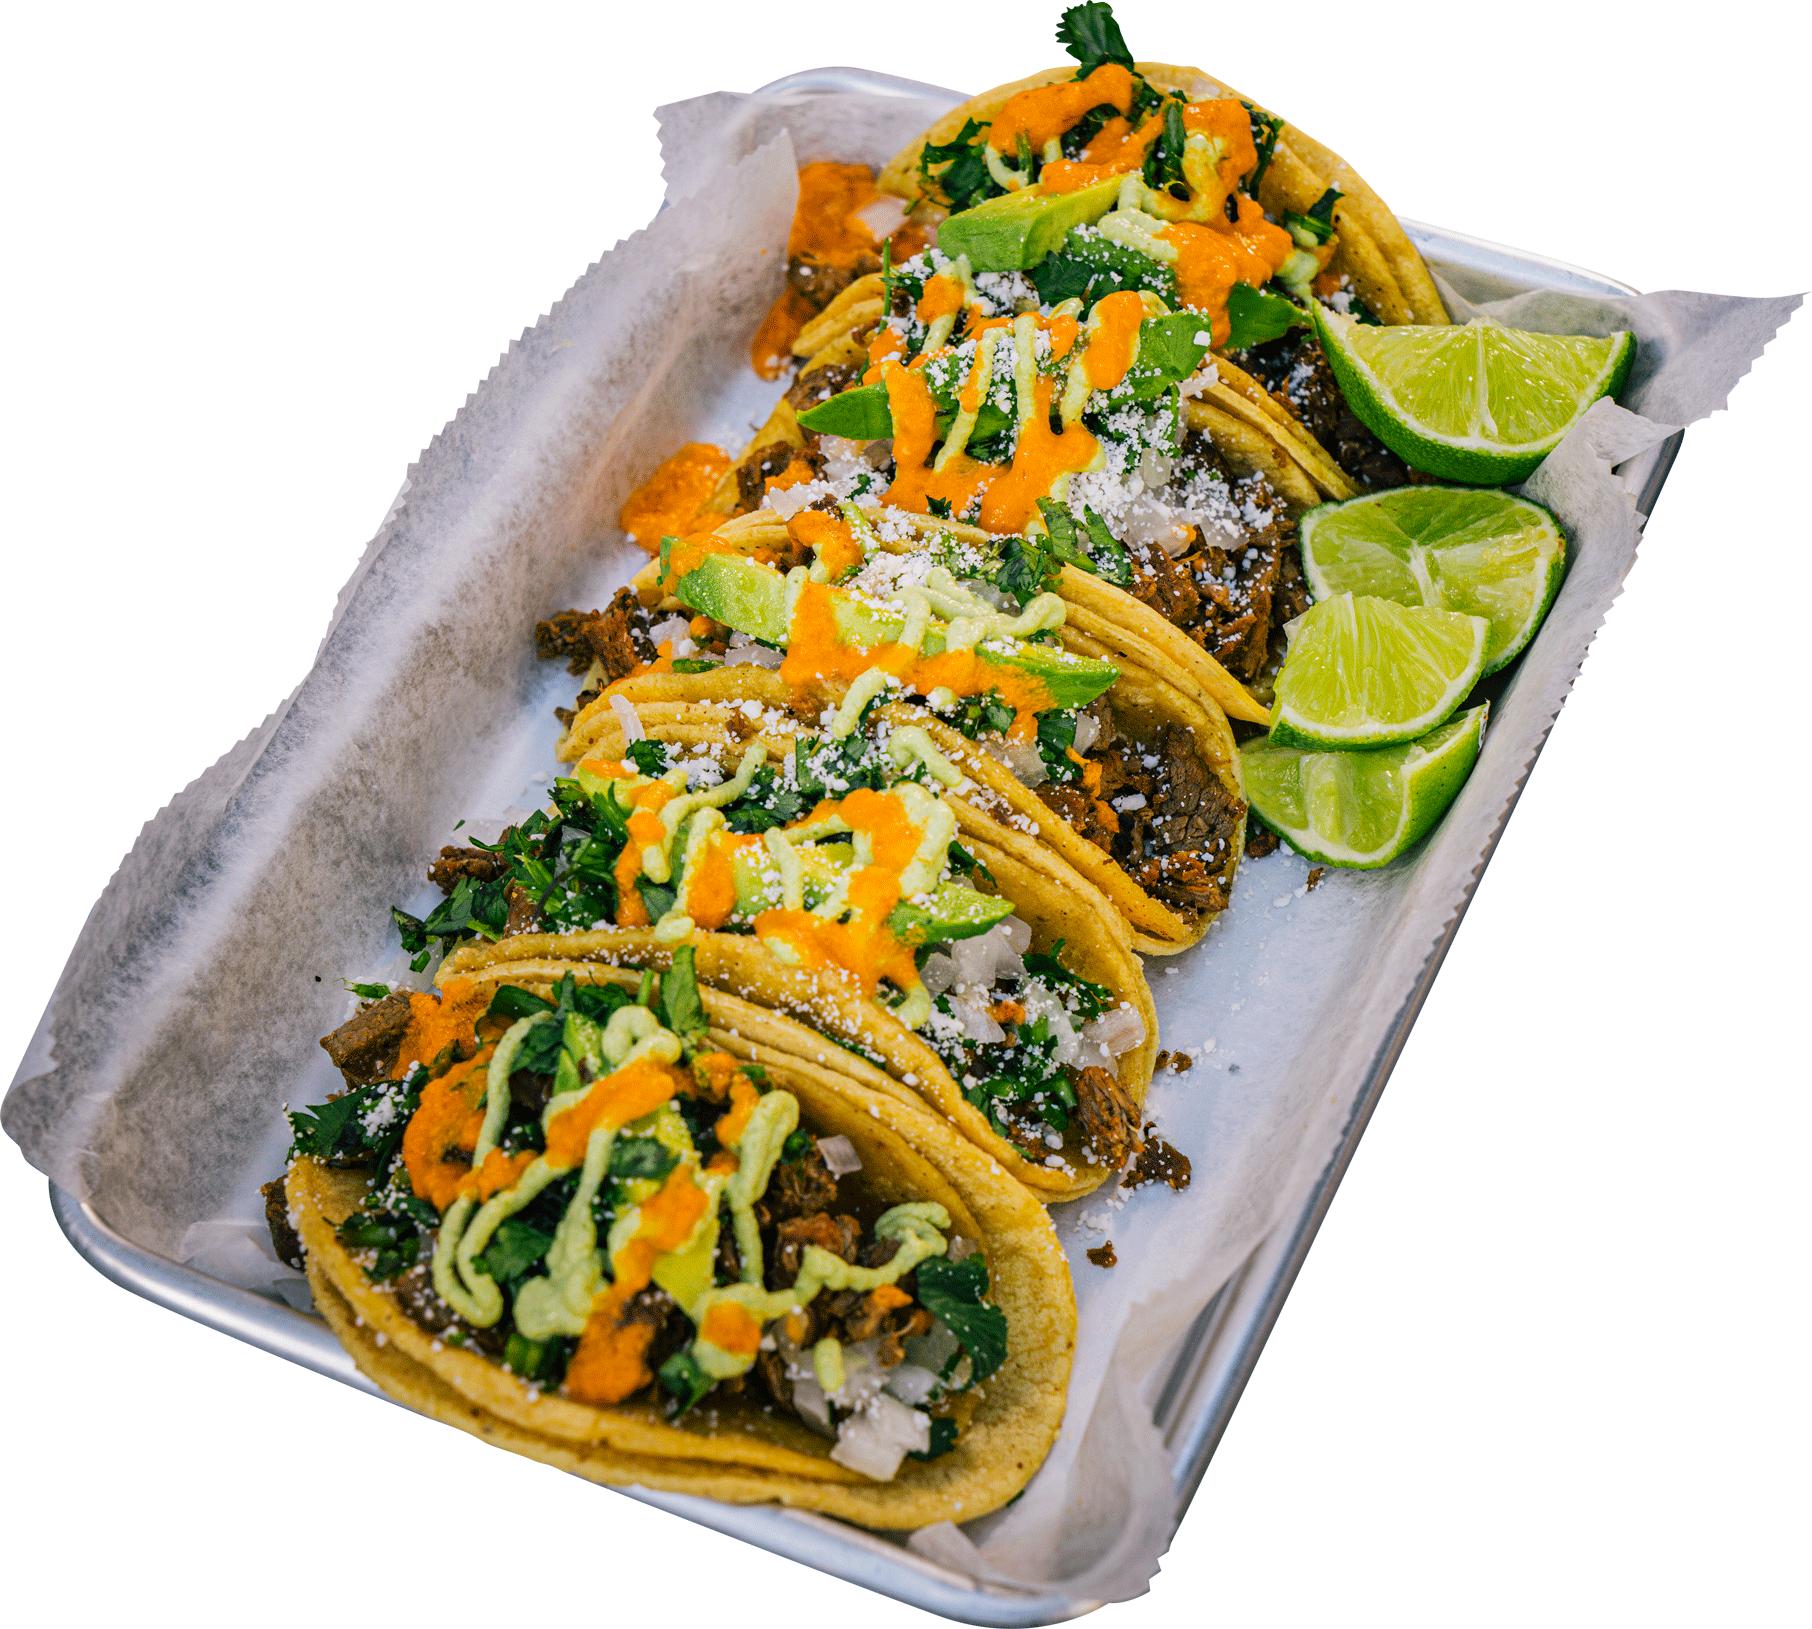 A tray of tacos with sauces and lime wedges